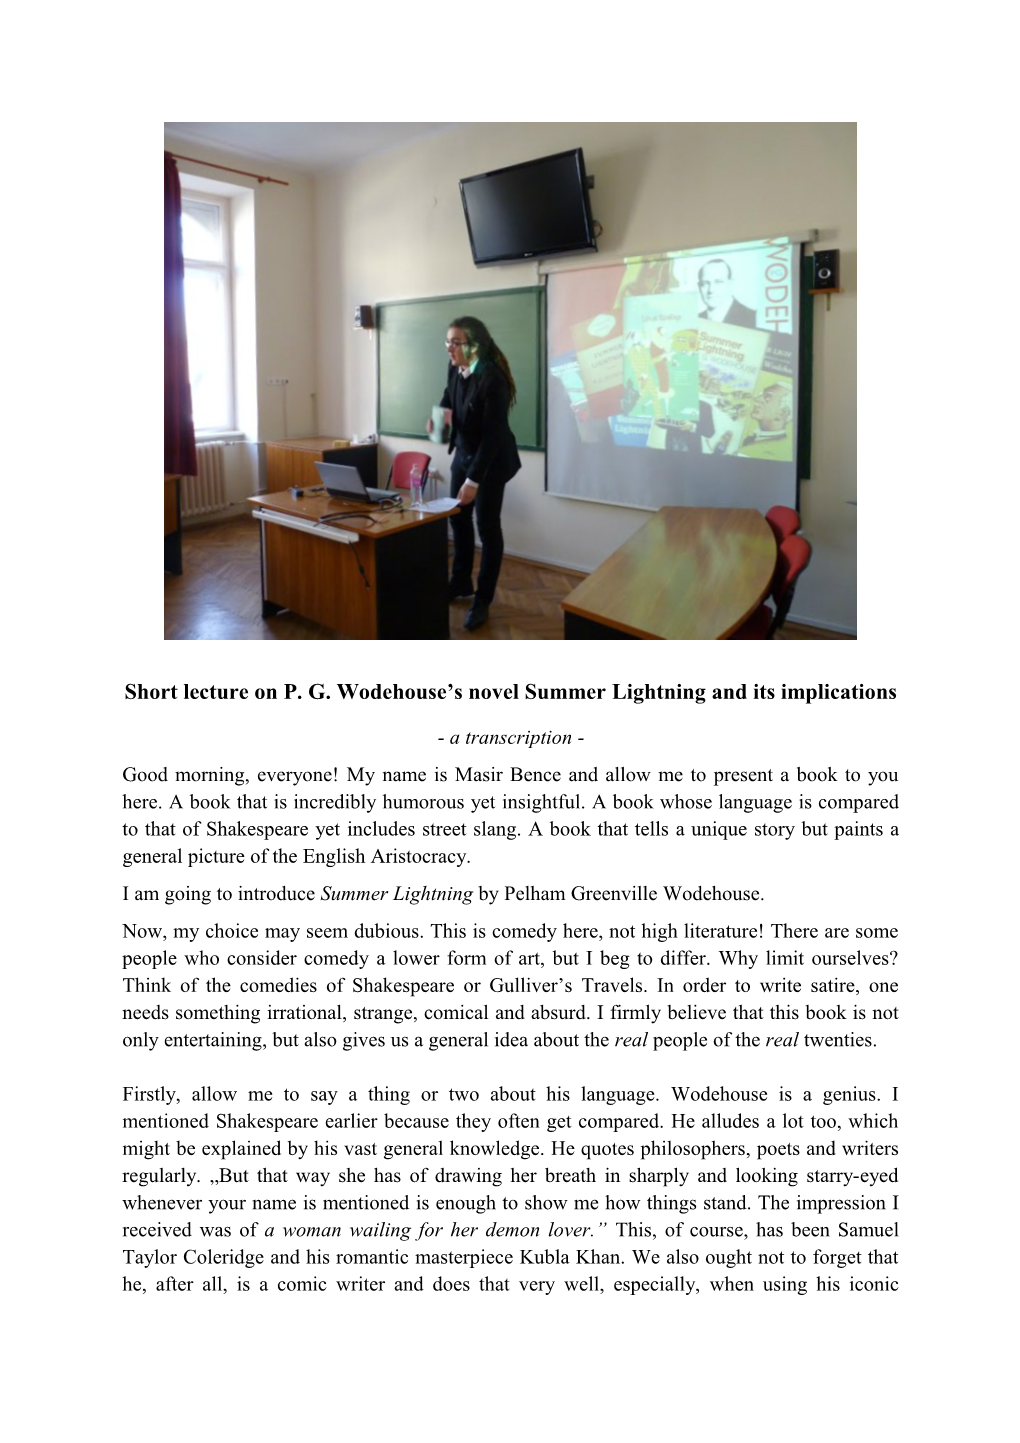 Short Lecture on P. G. Wodehouse S Novel Summer Lightning and Its Implications